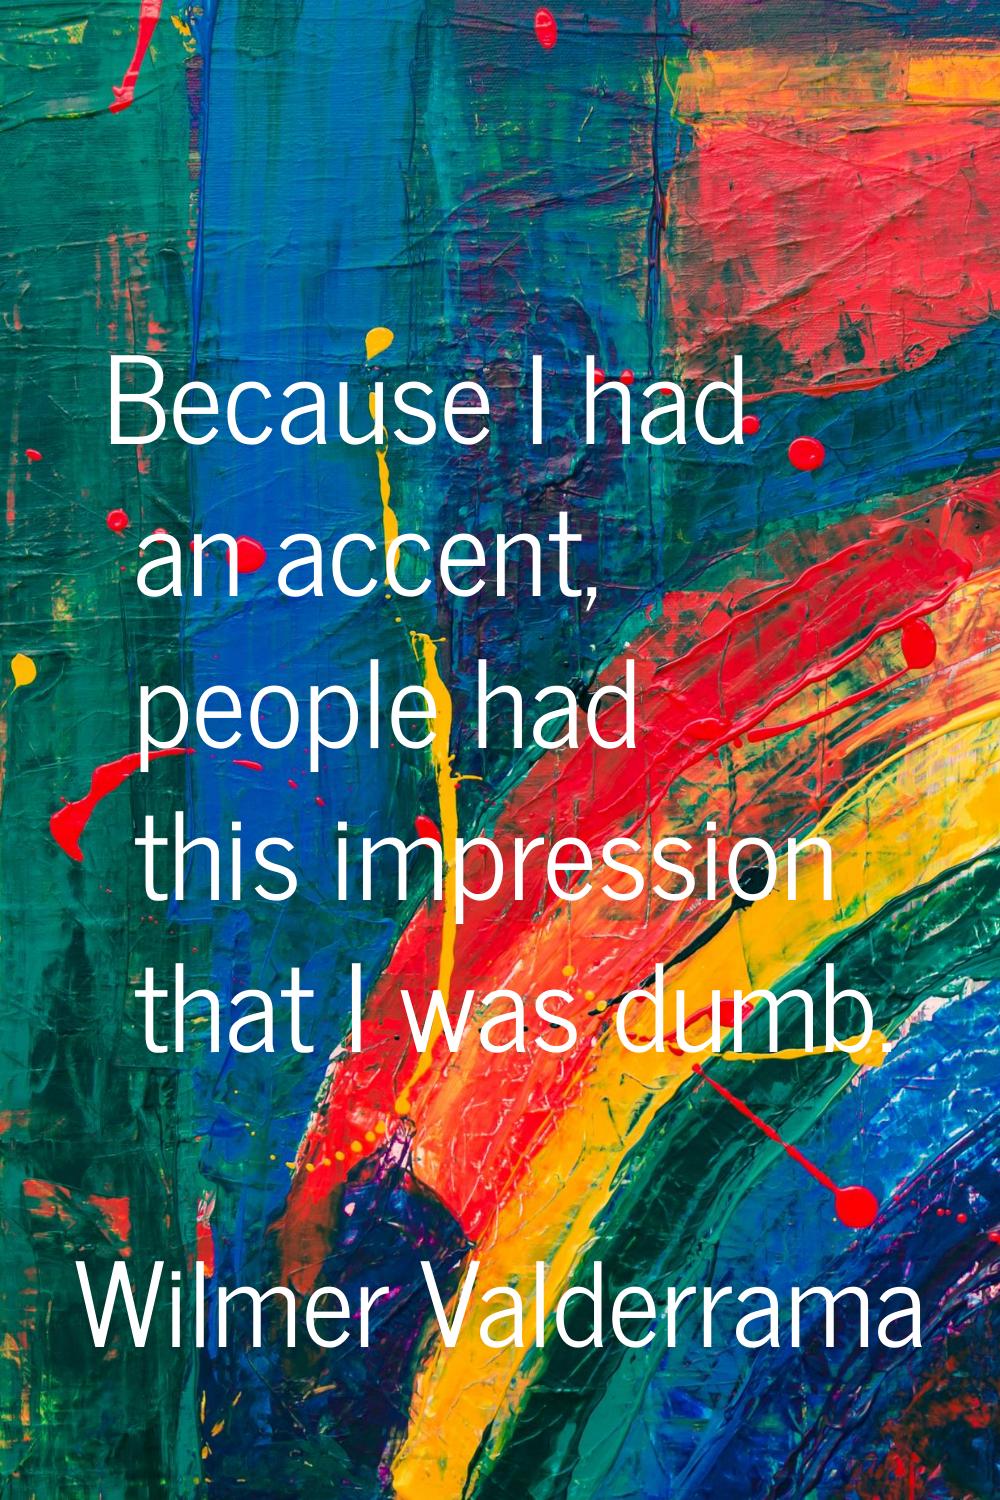 Because I had an accent, people had this impression that I was dumb.